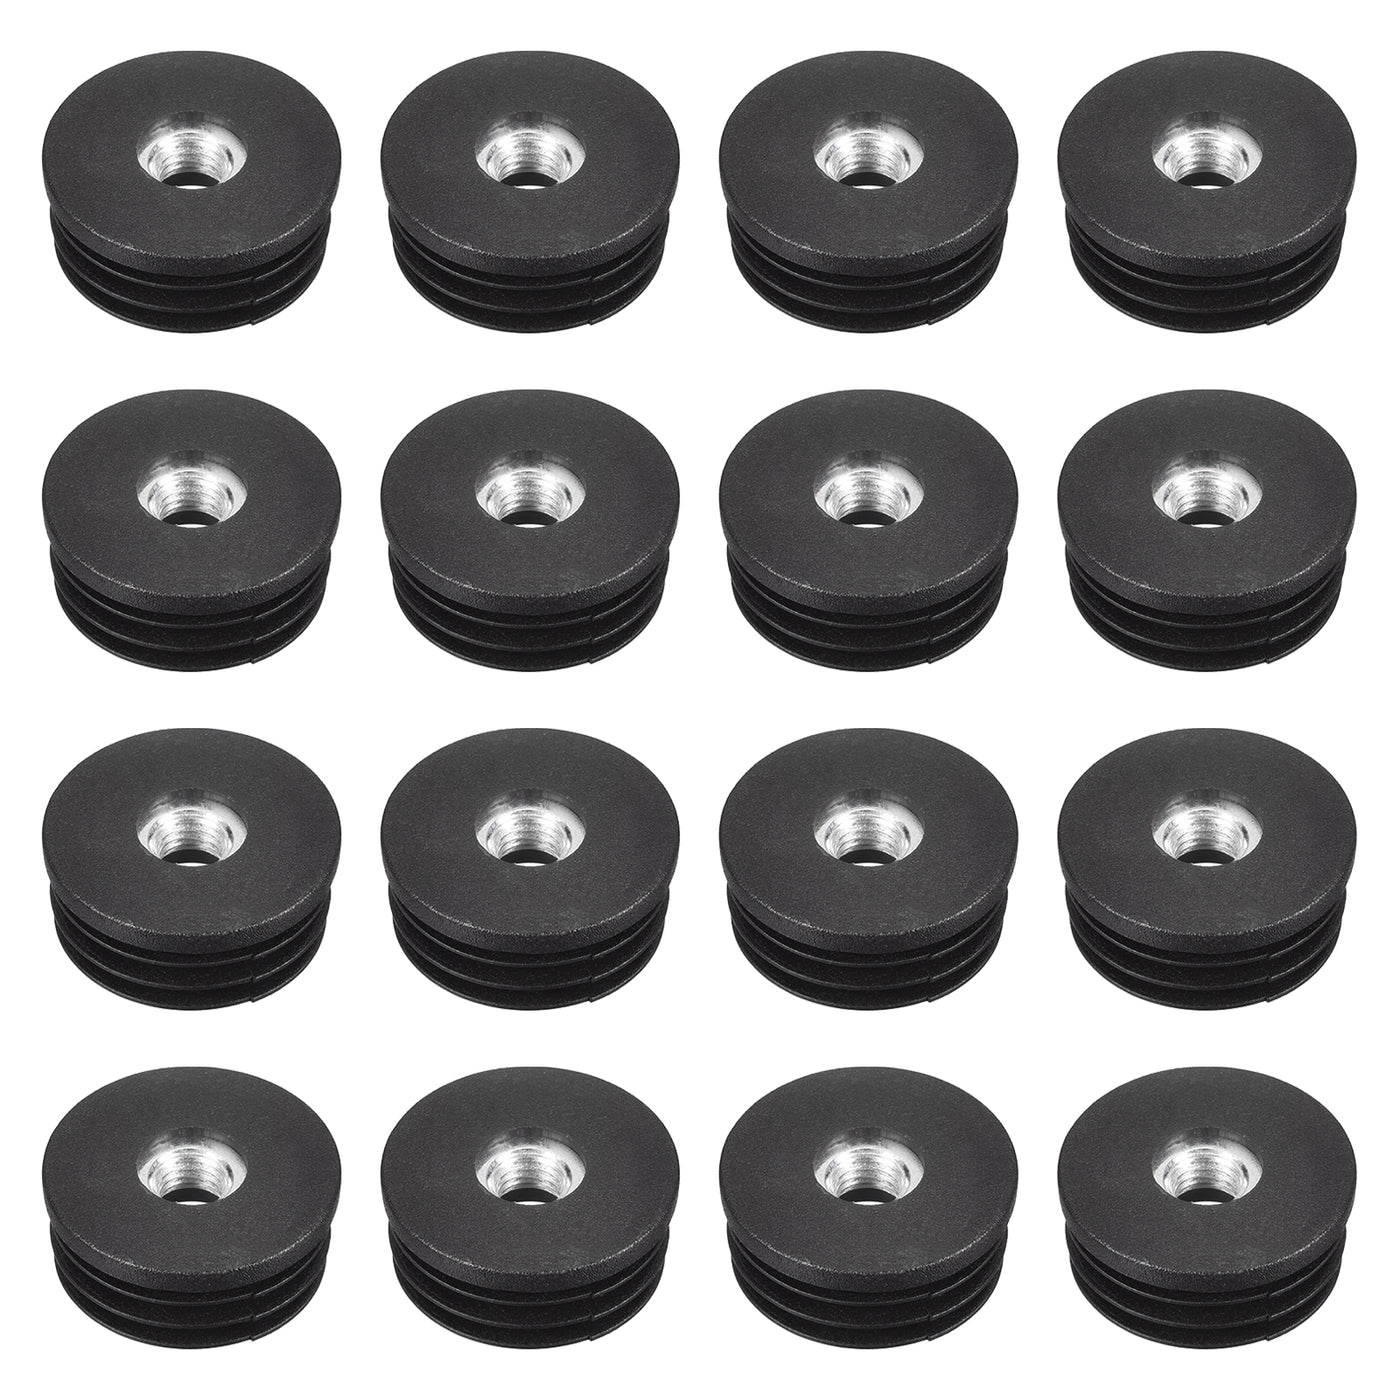 uxcell Uxcell 24Pcs 32mm/1.26" Caster Insert with Thread, Round M8 Thread for Furniture